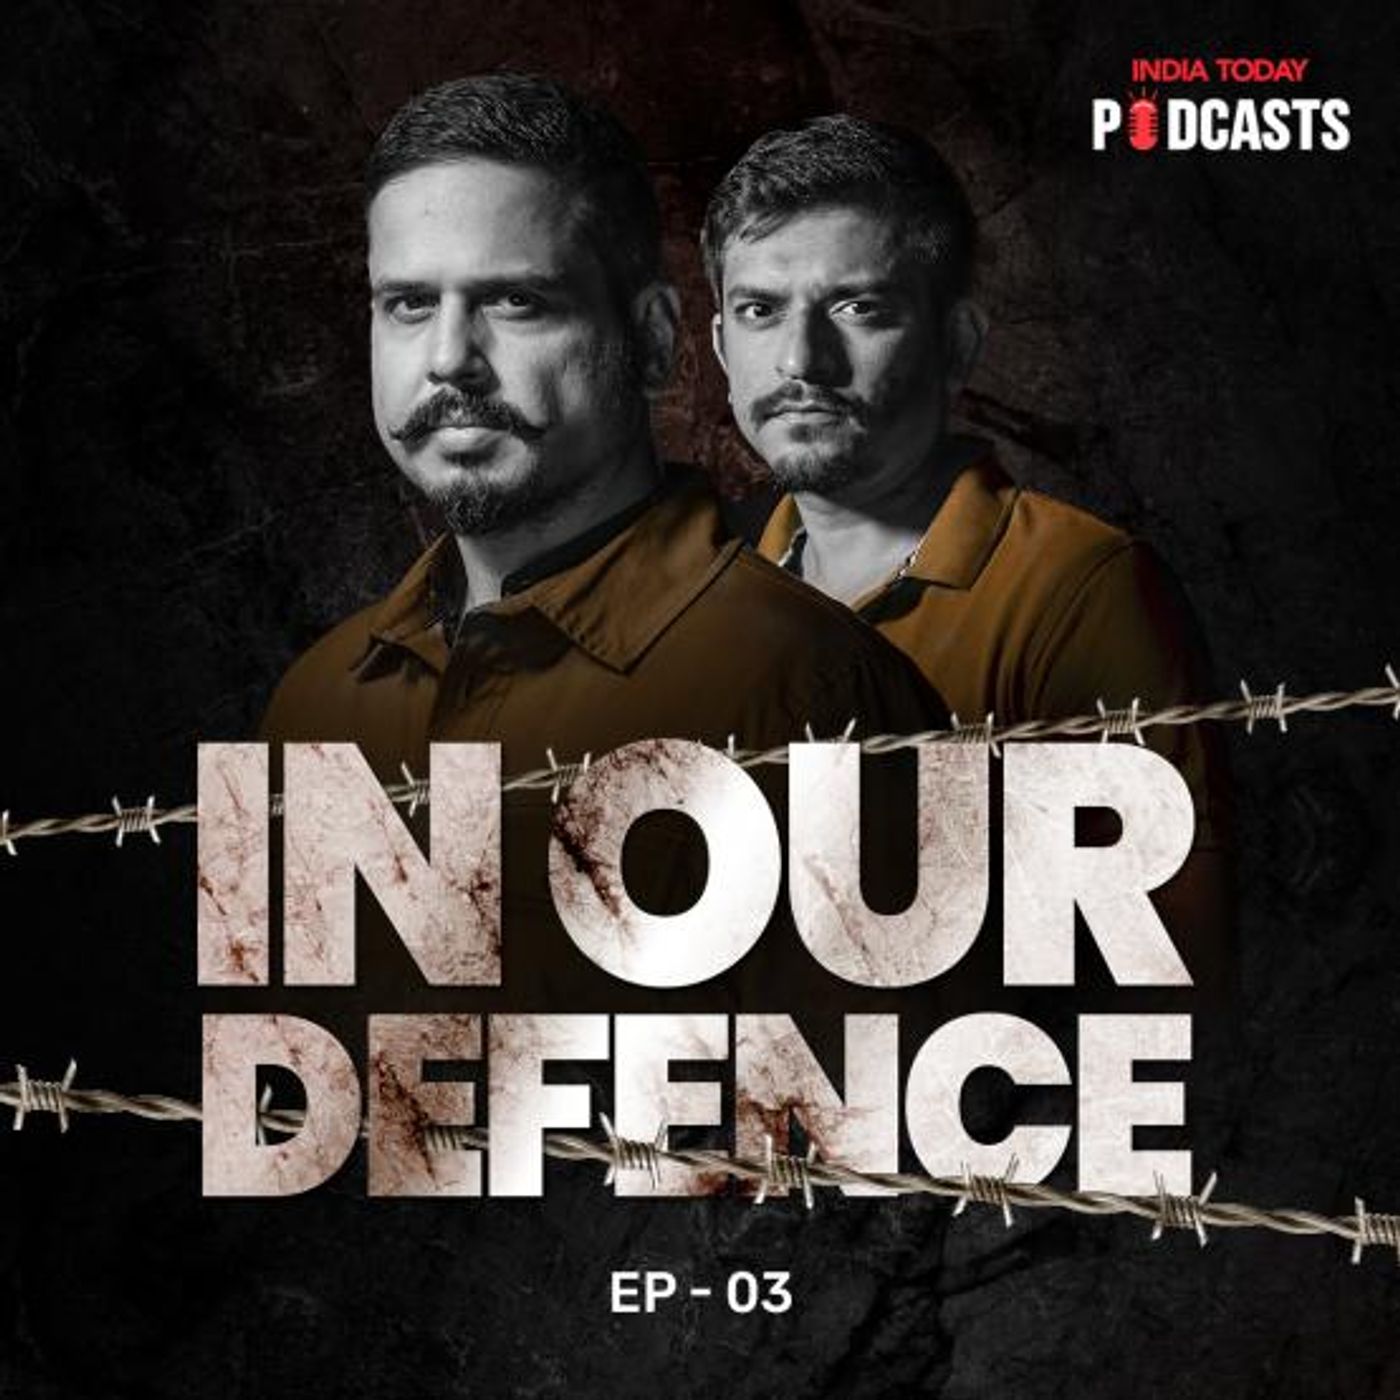 Dead or Alive, Why Dawood Ibrahim Weighs Heavy On India's Psyche | In Our Defence S2, Ep 03